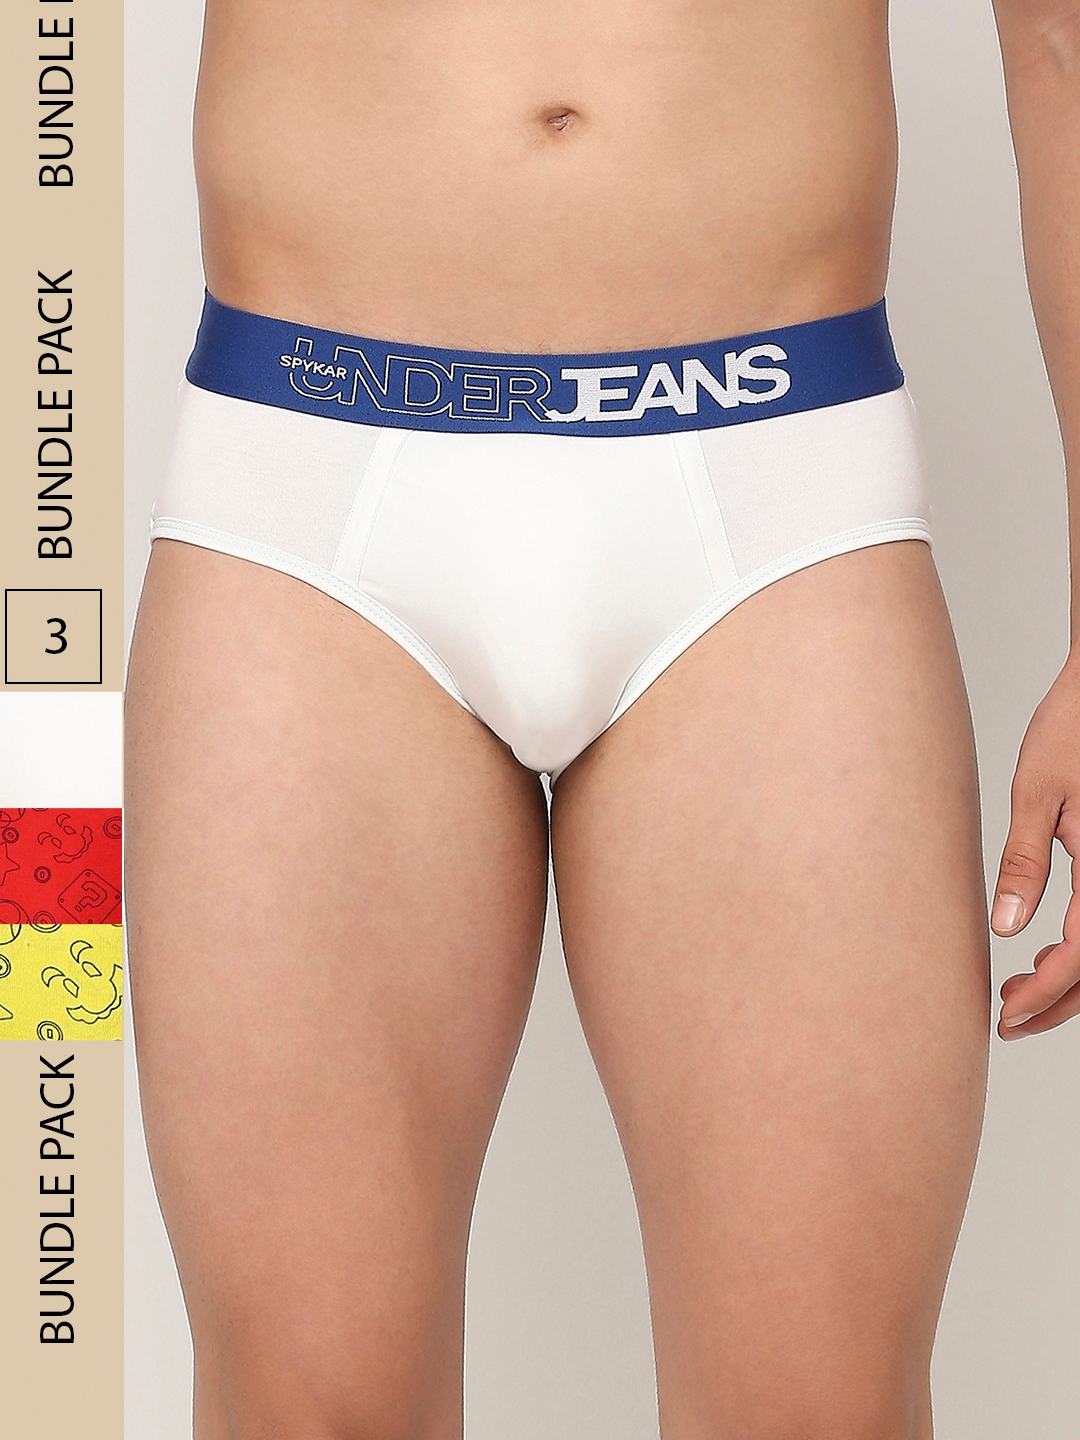 spykar | Underjeans by Spykar Premium Red Yellow & White Cotton Blend Printed Brief - Pack Of 3